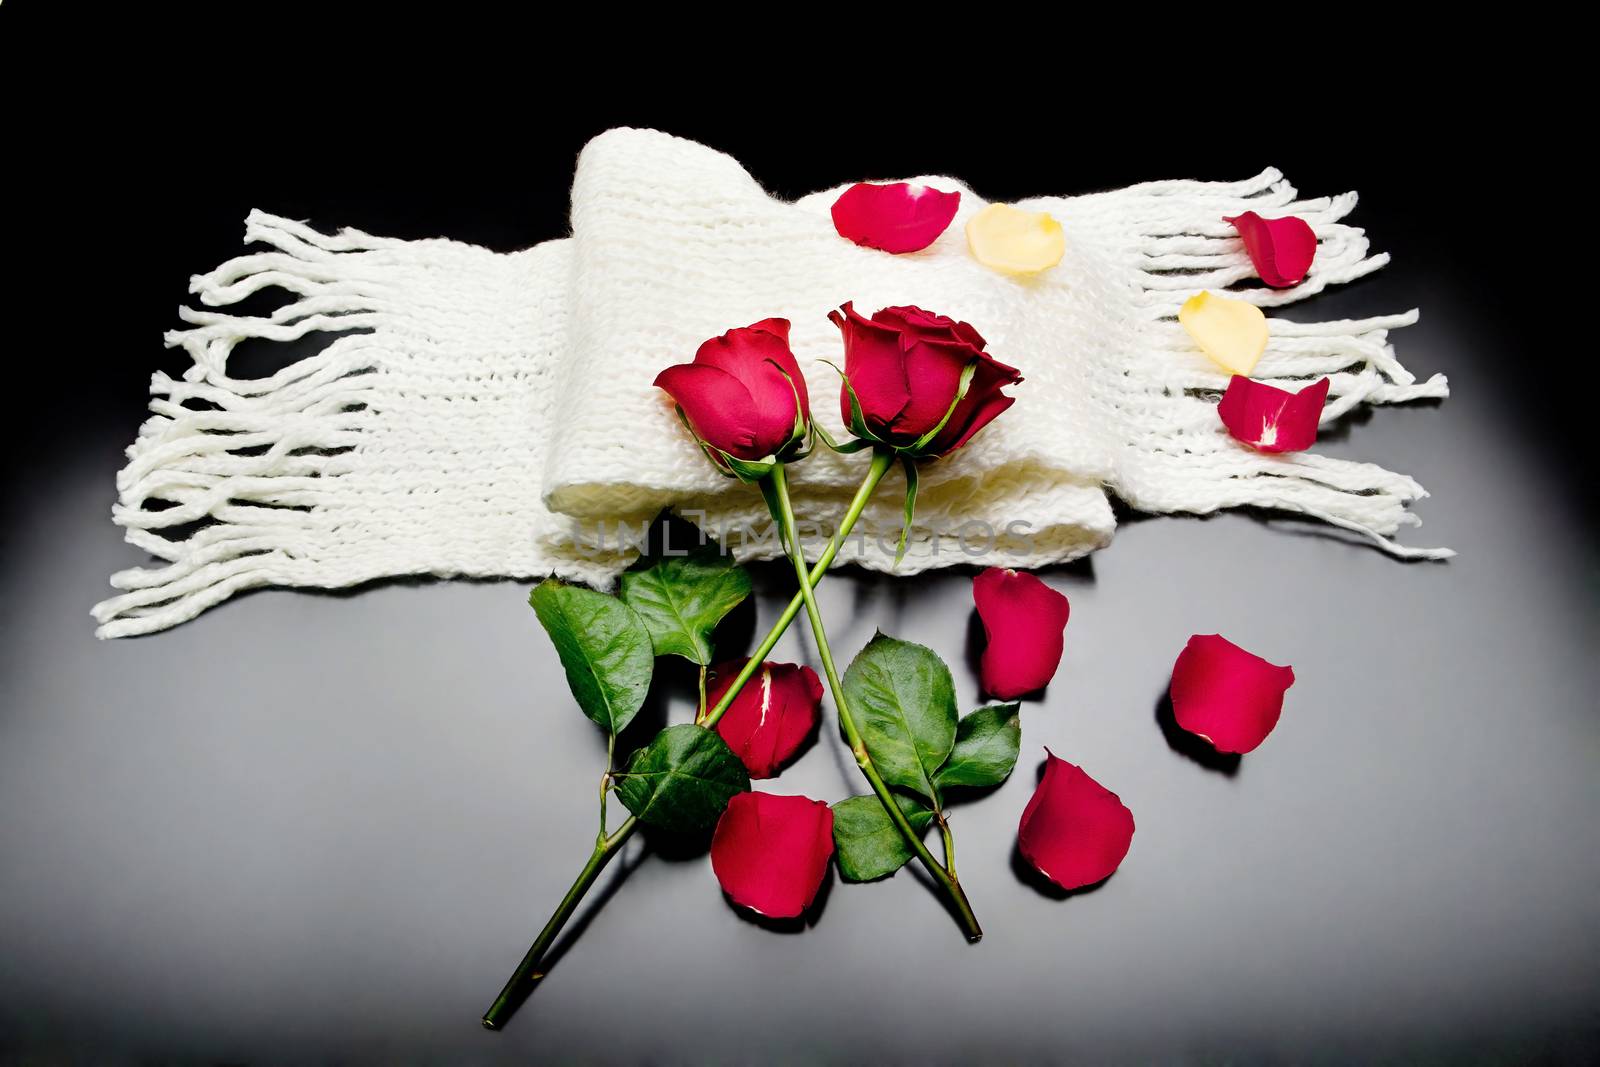 two red roses together with red petals on a black background on a scarf
Poetry.